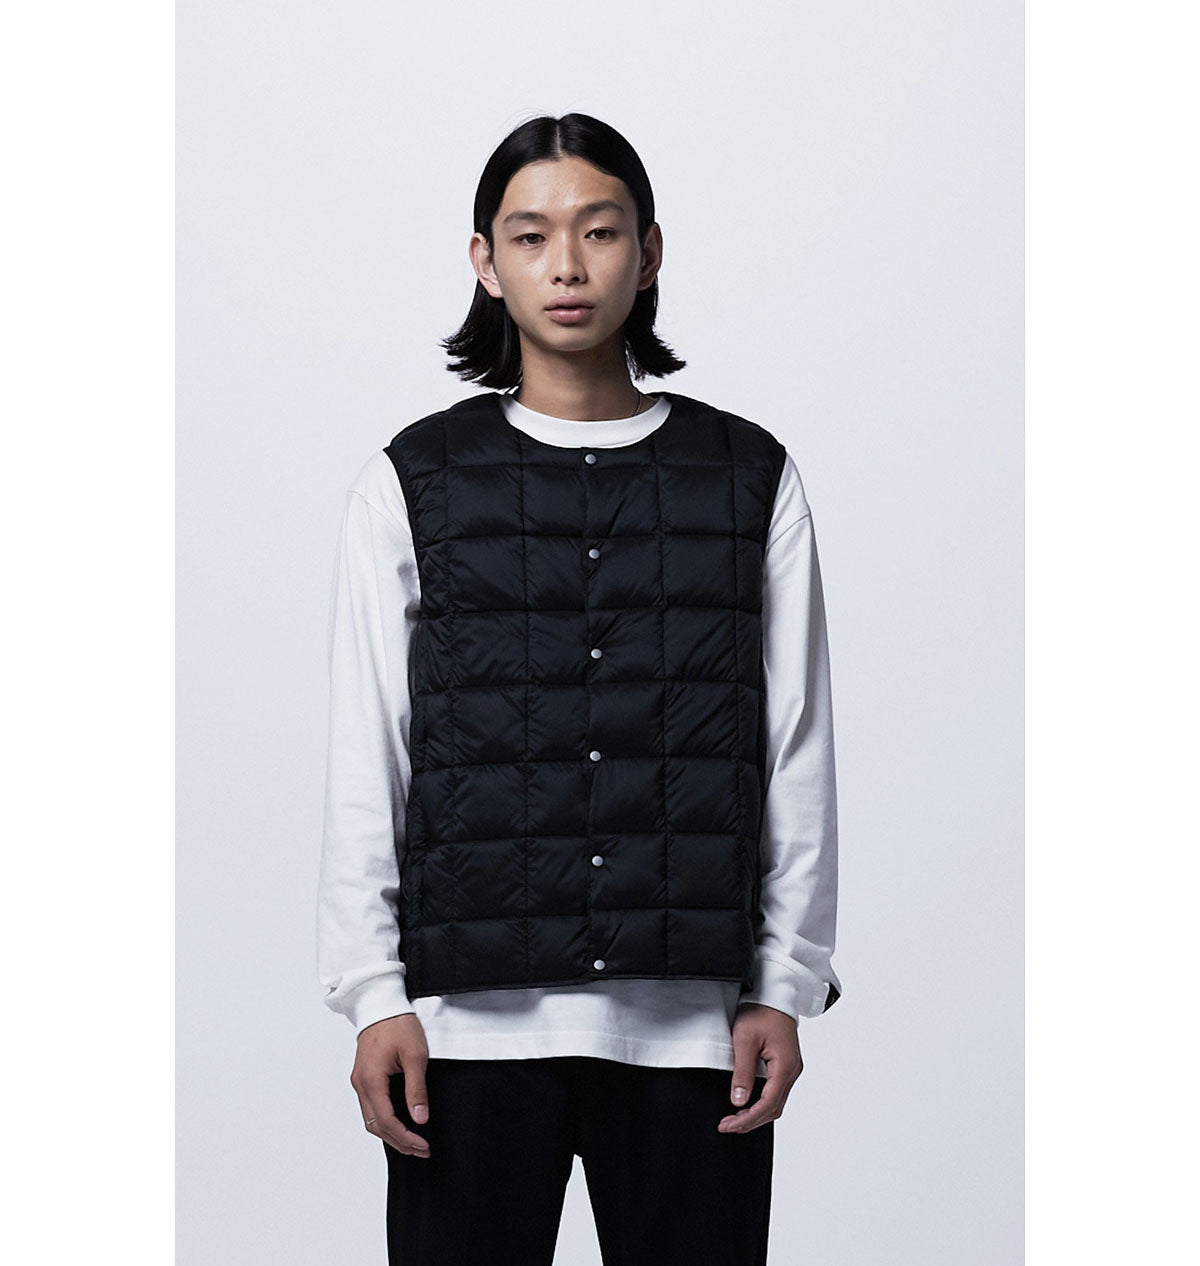 TAION Crew Neck Inner Down Vest 004 – unexpected store